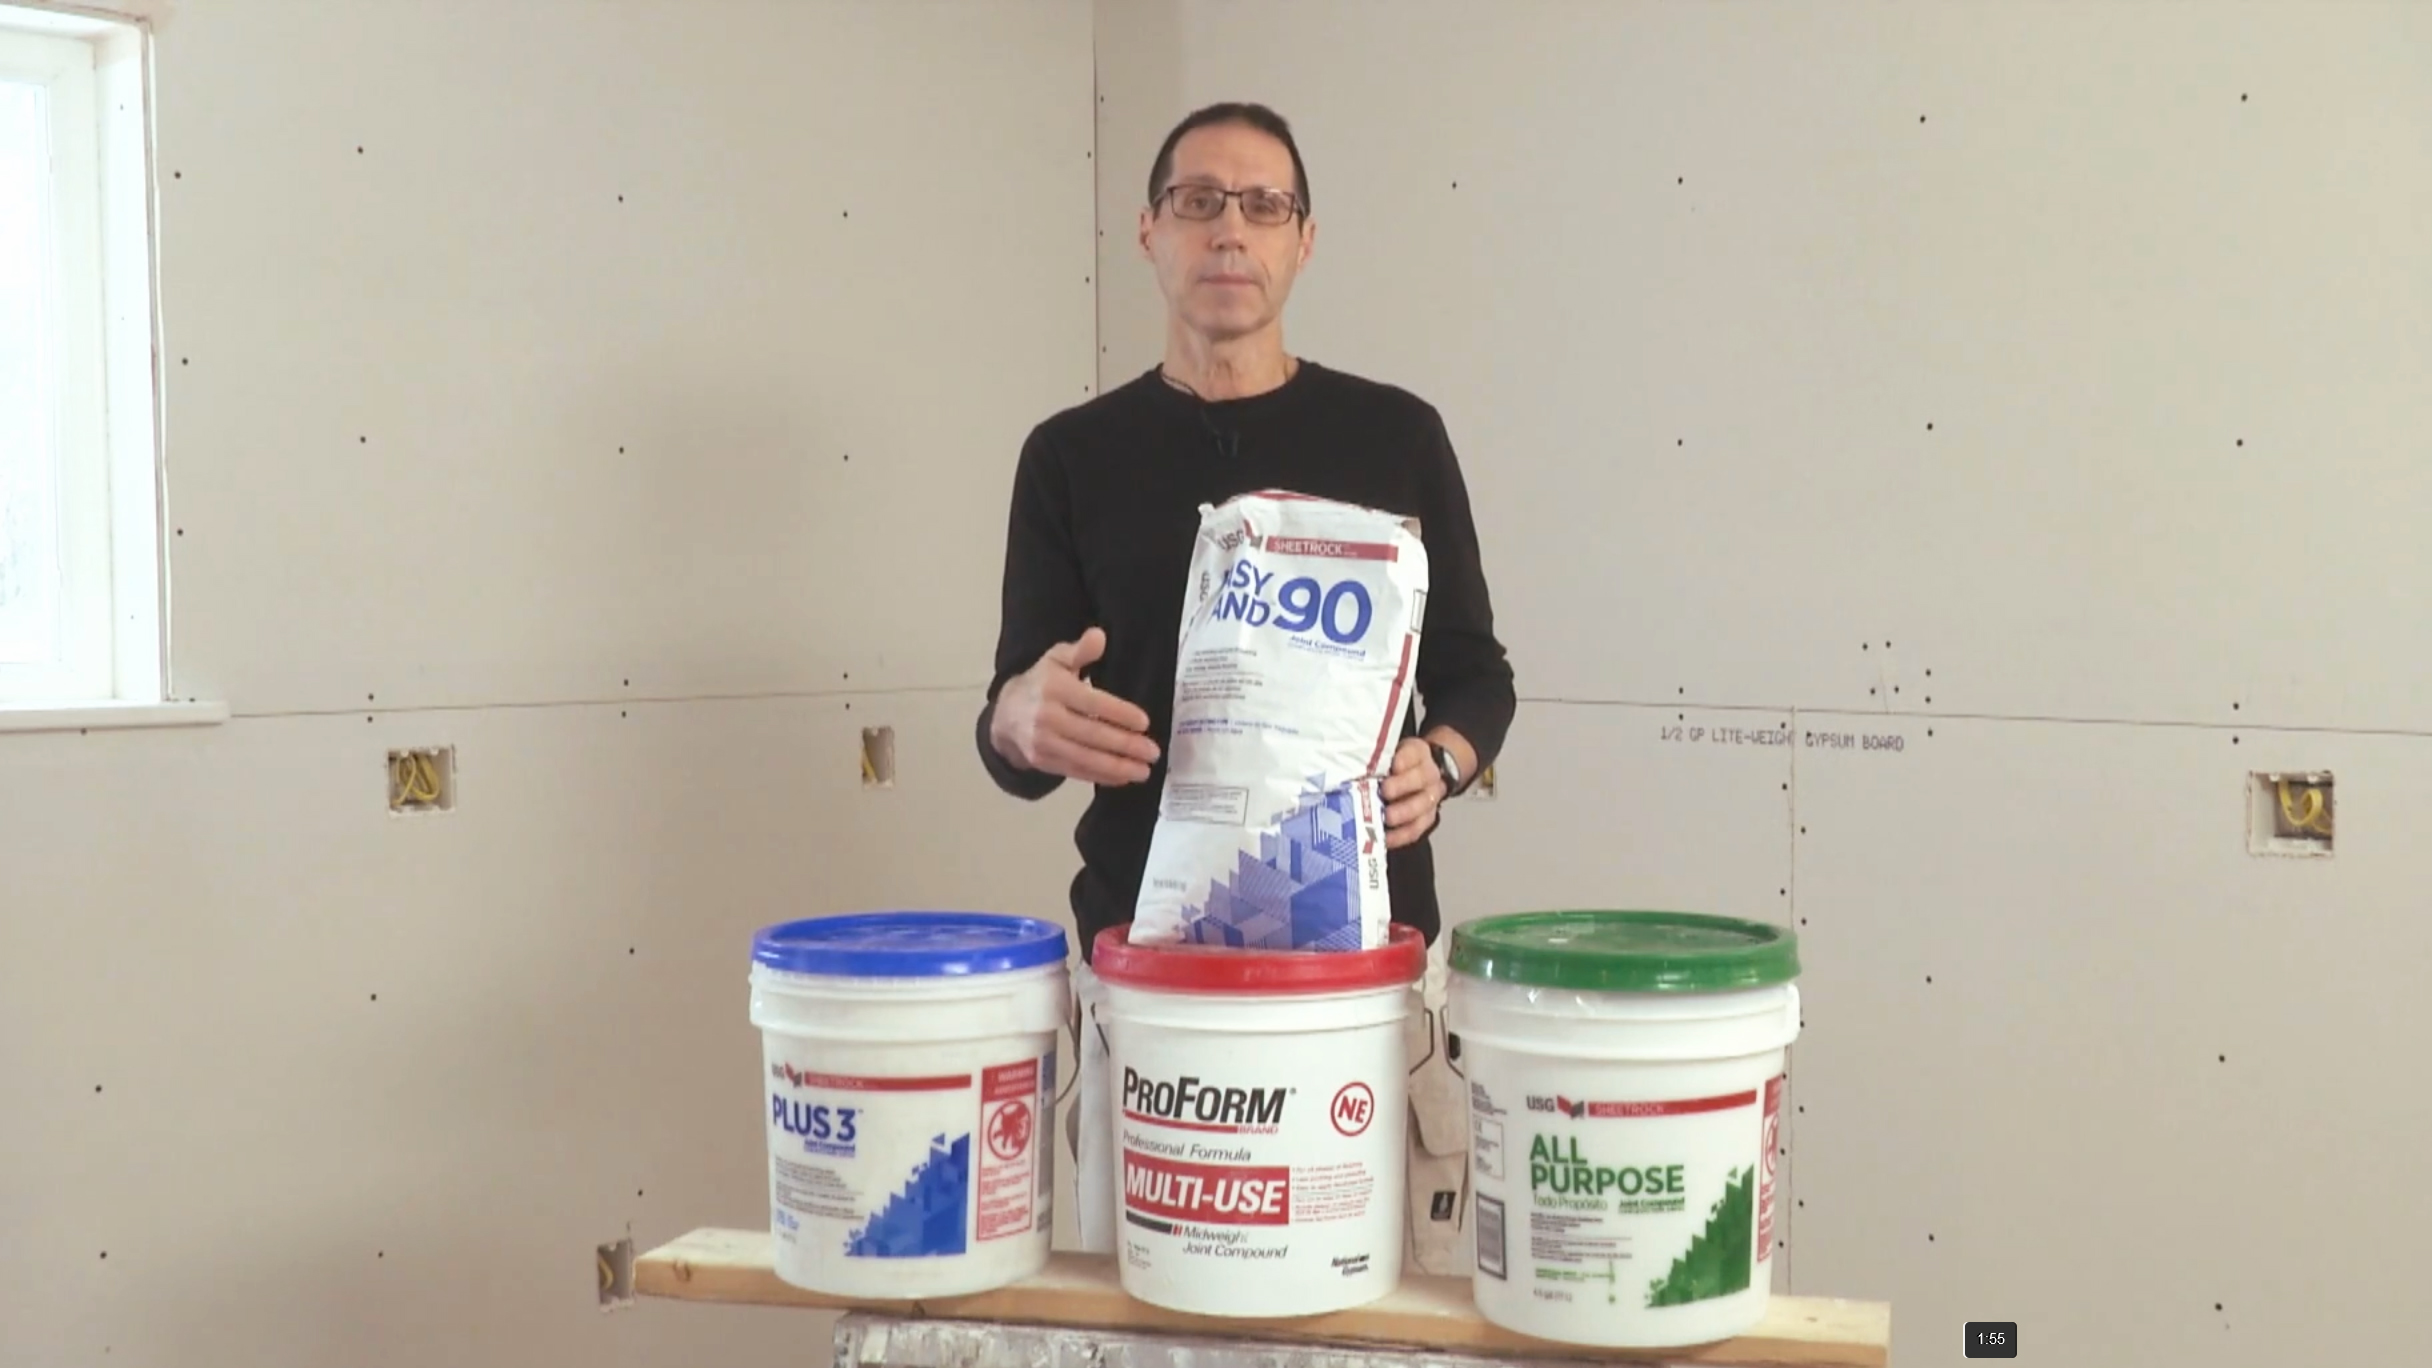 Myron displays a set of drywall compounds